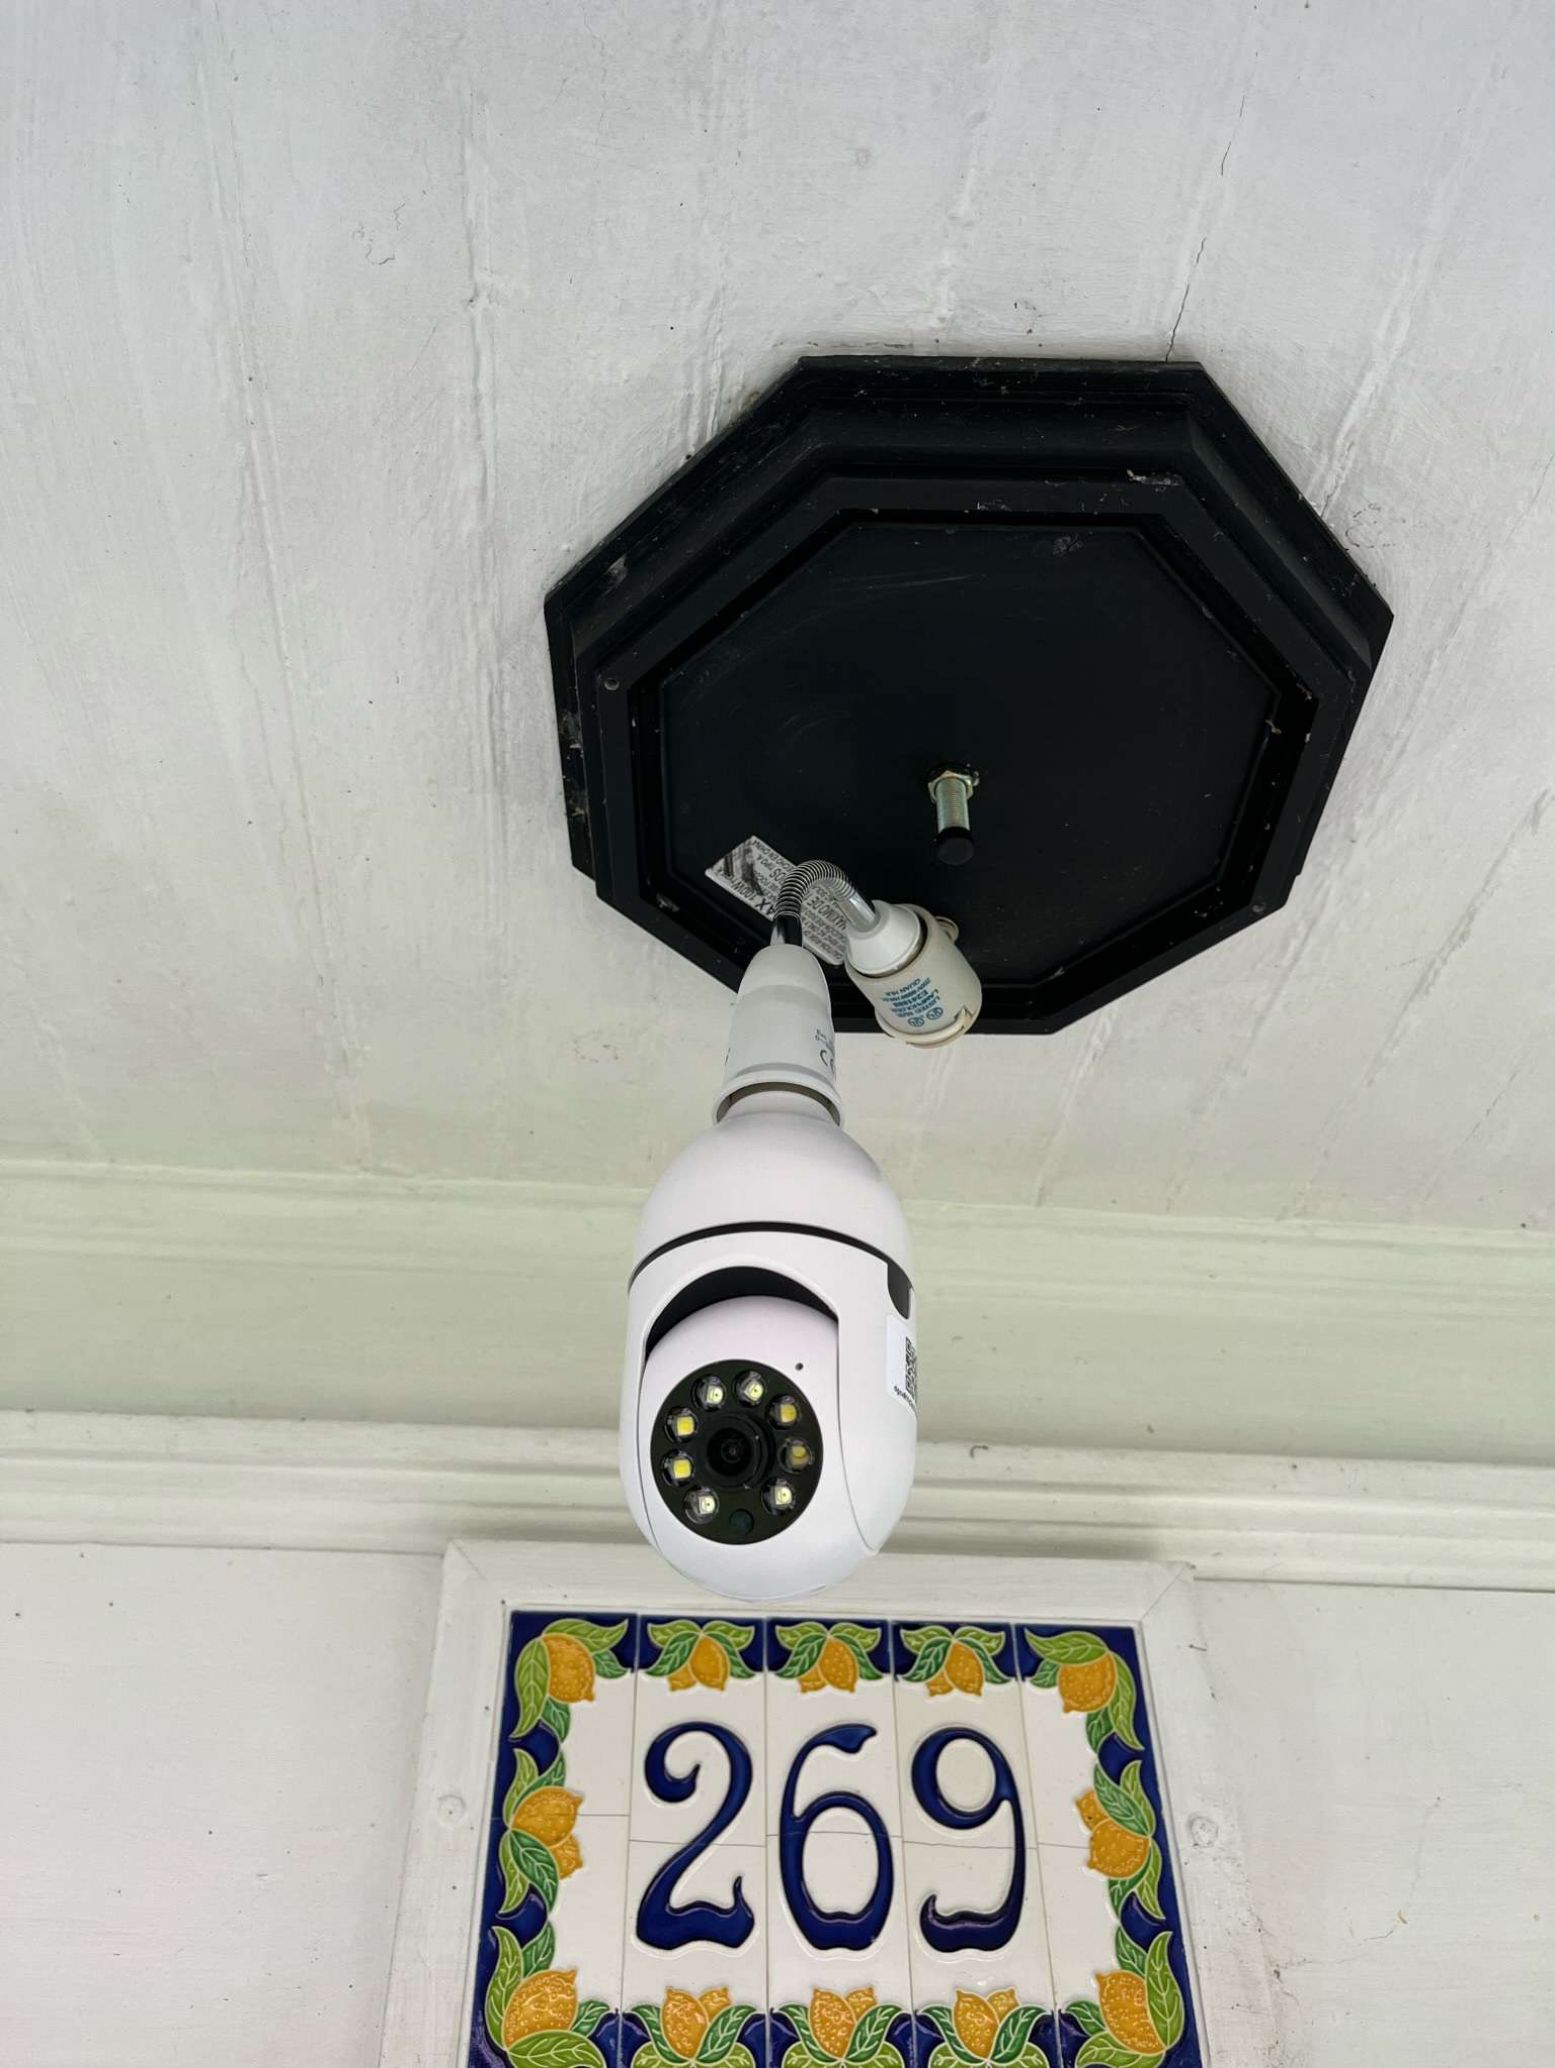 Where Can I Buy Nomad Security Camera